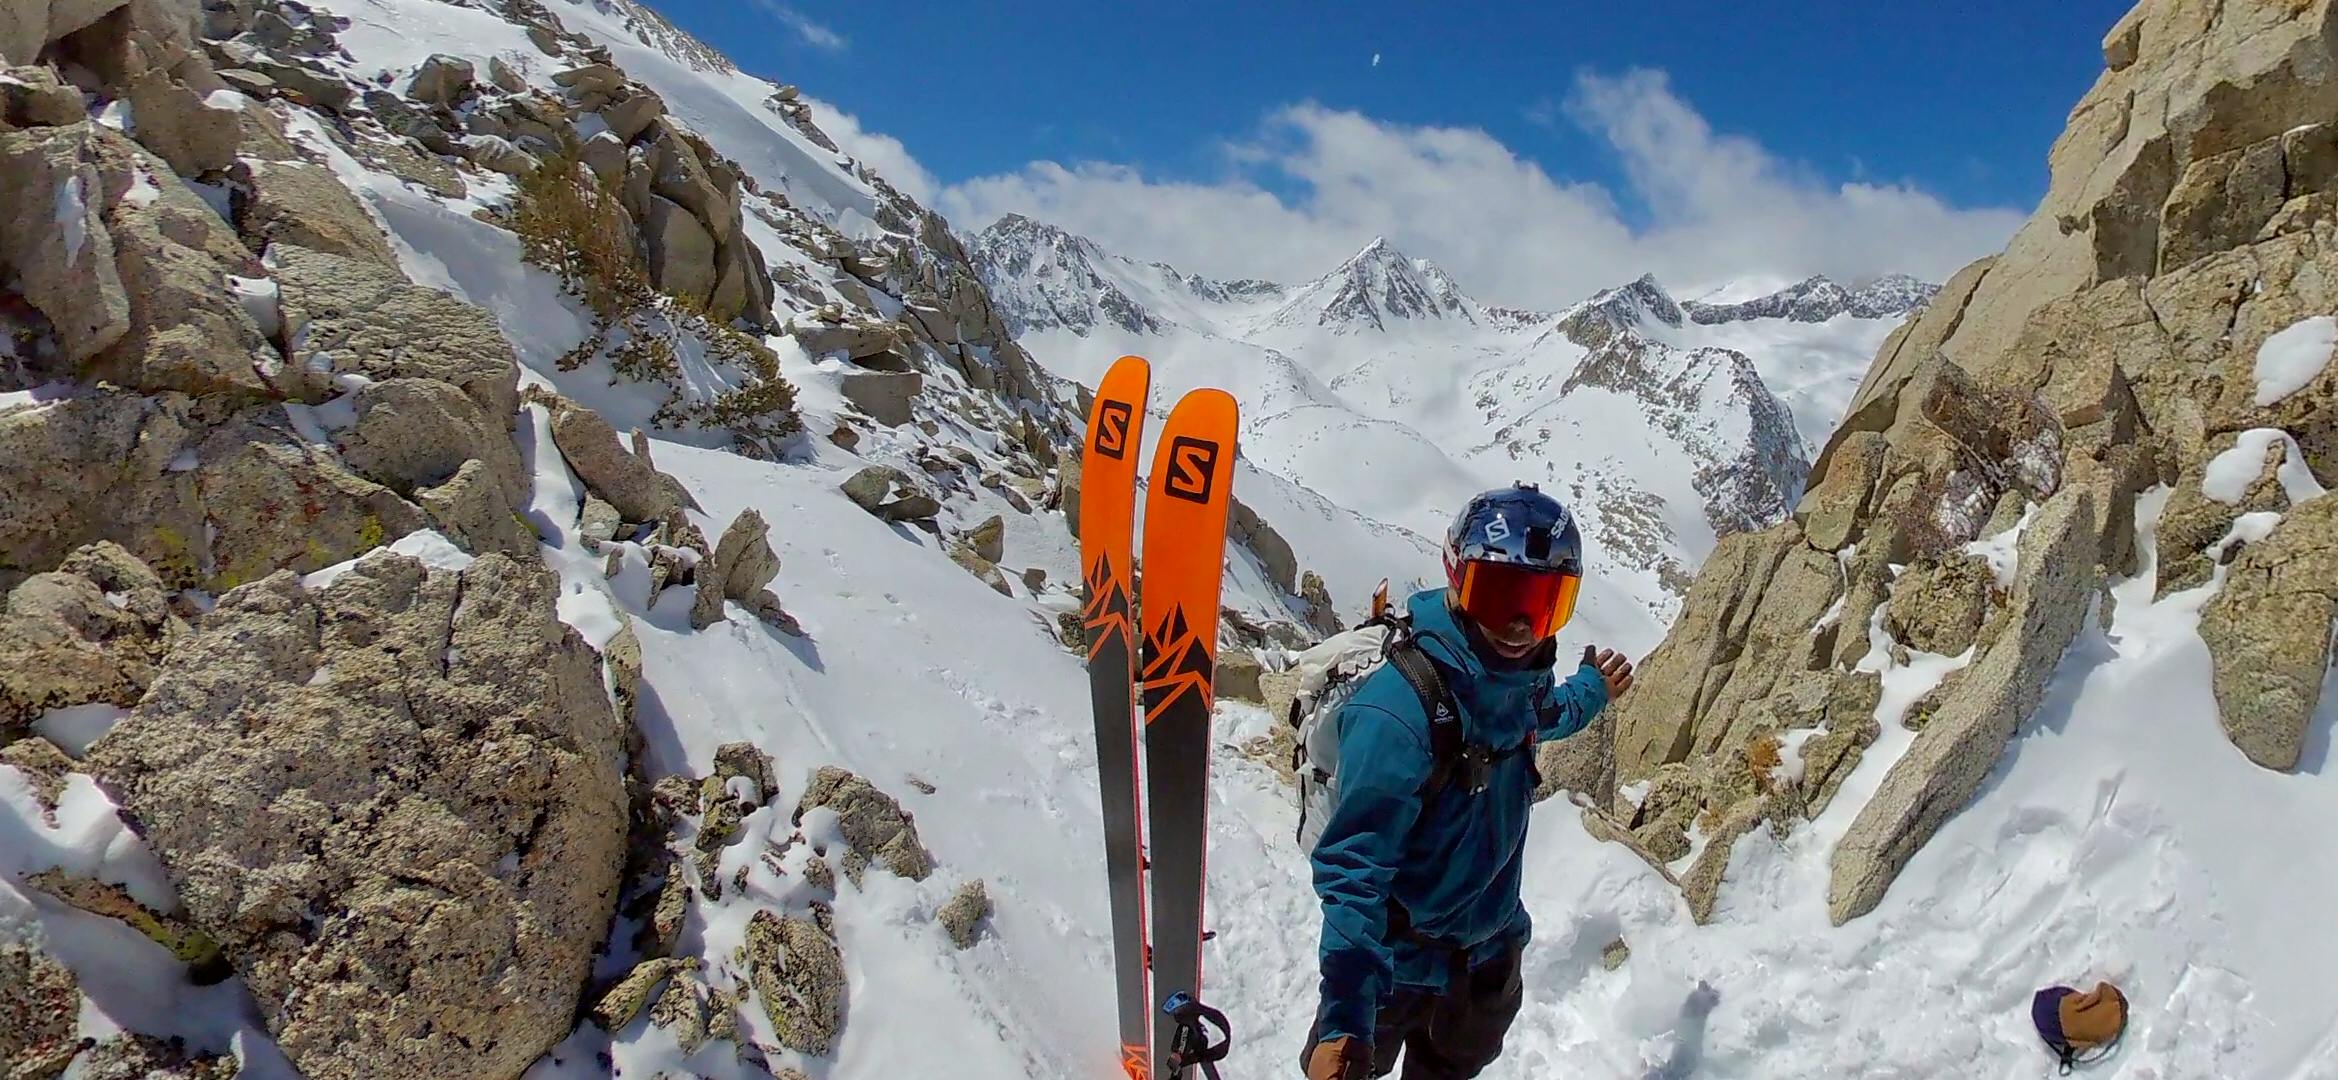 Josh takes a selfie on the mountain while wearing a google and a helmet. His Salomon skis are propped up next to him.